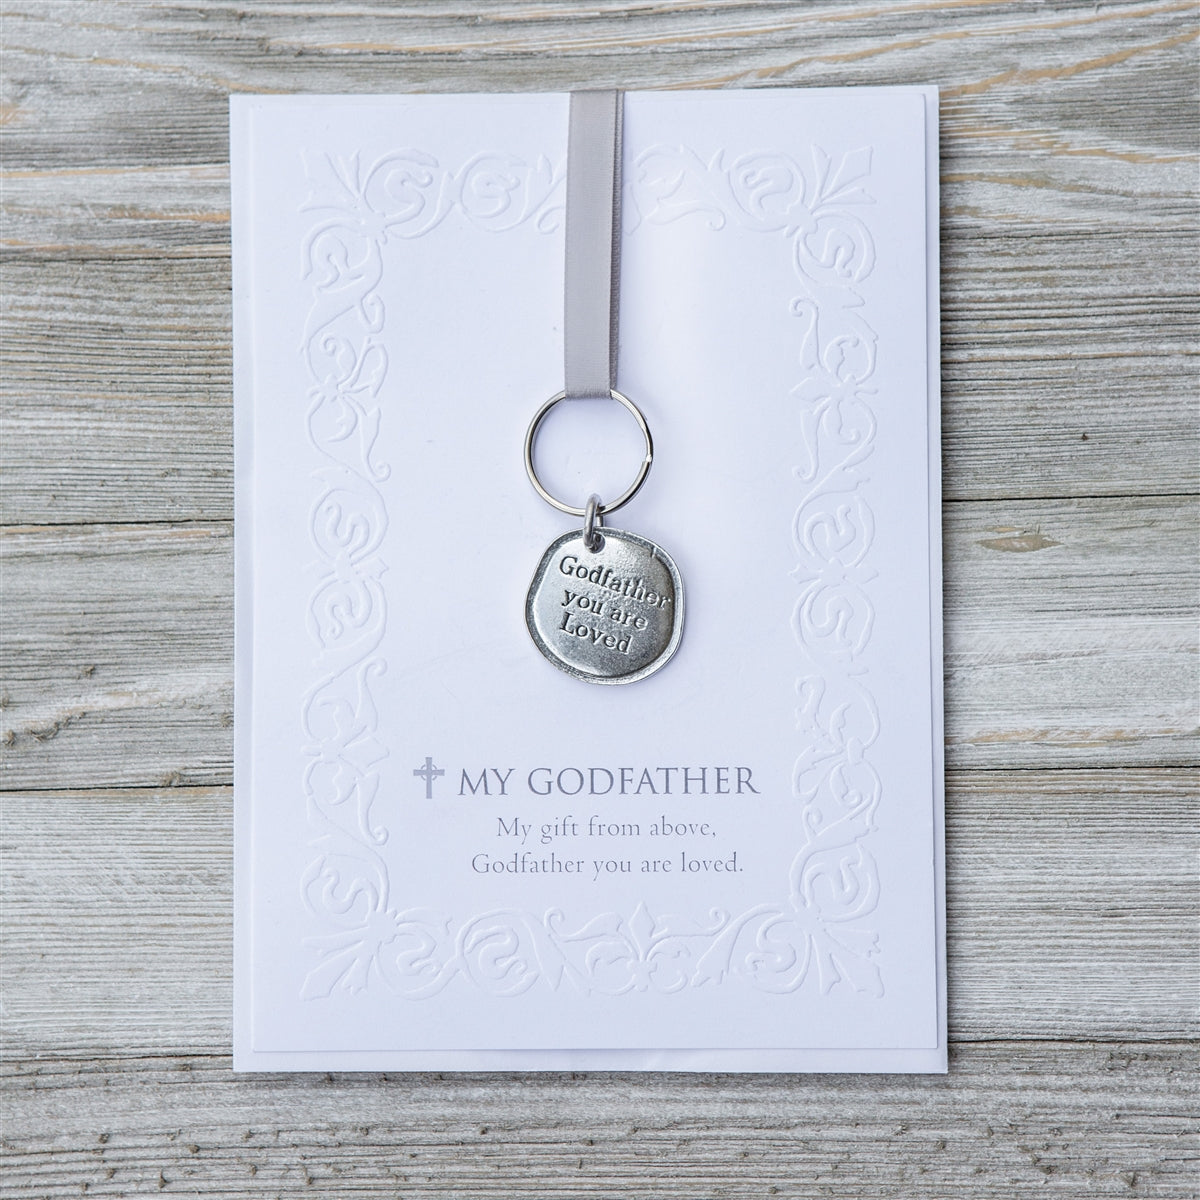 Keychain with pewter coin that says "Godfather you are loved" packaged with an embossed notecard with My Godfather sentiment.